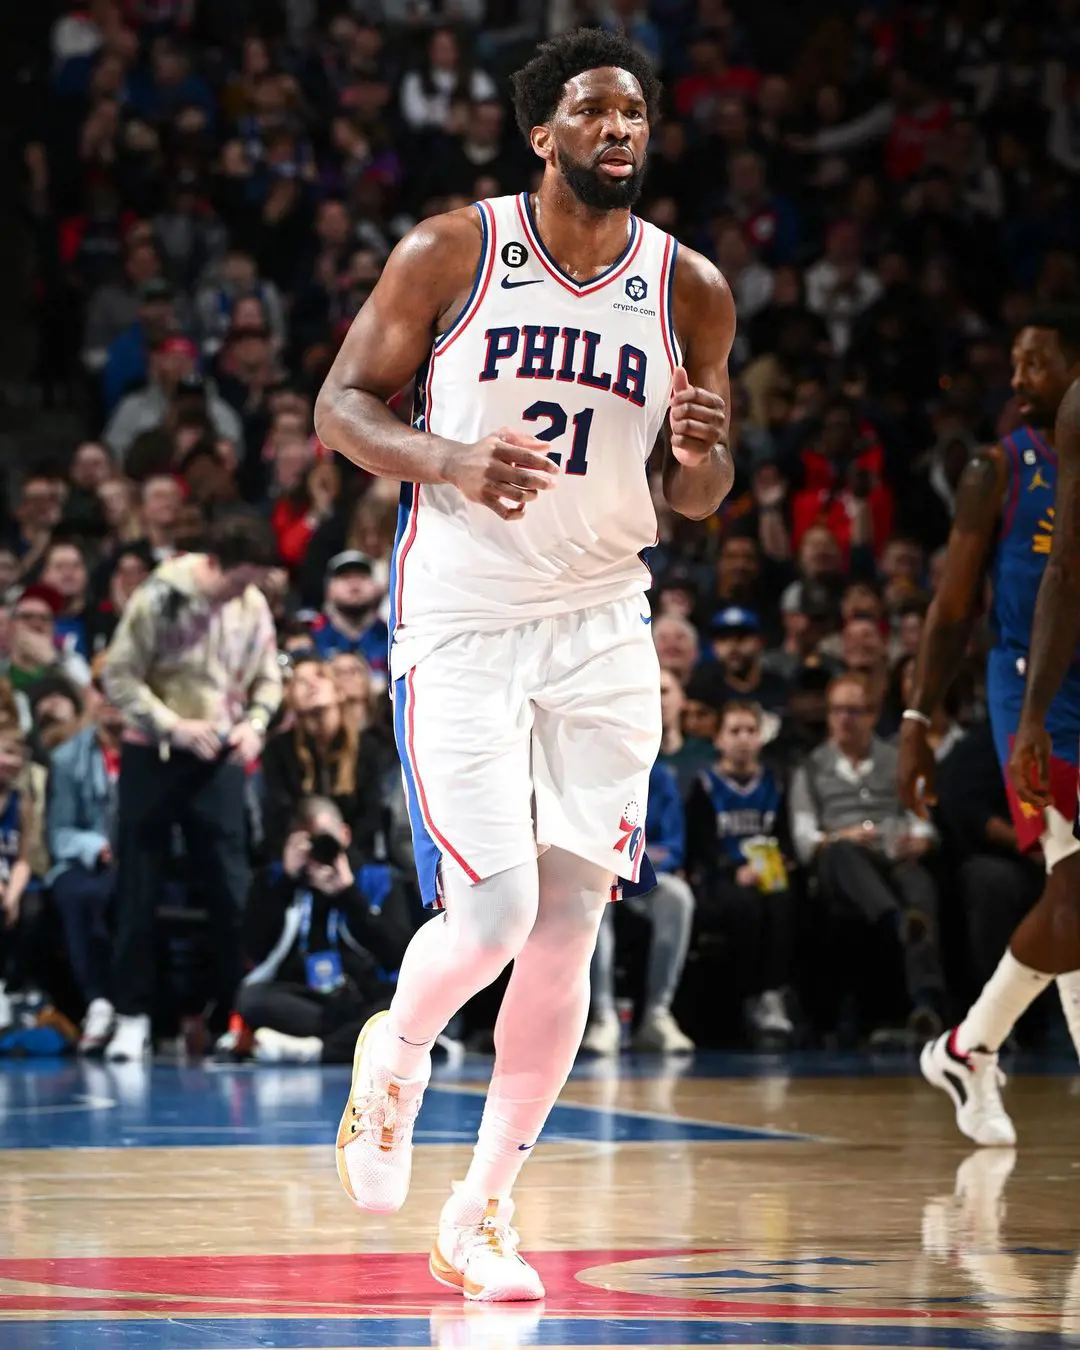 Joel is the first foreign player to lead the NBA in scoring.